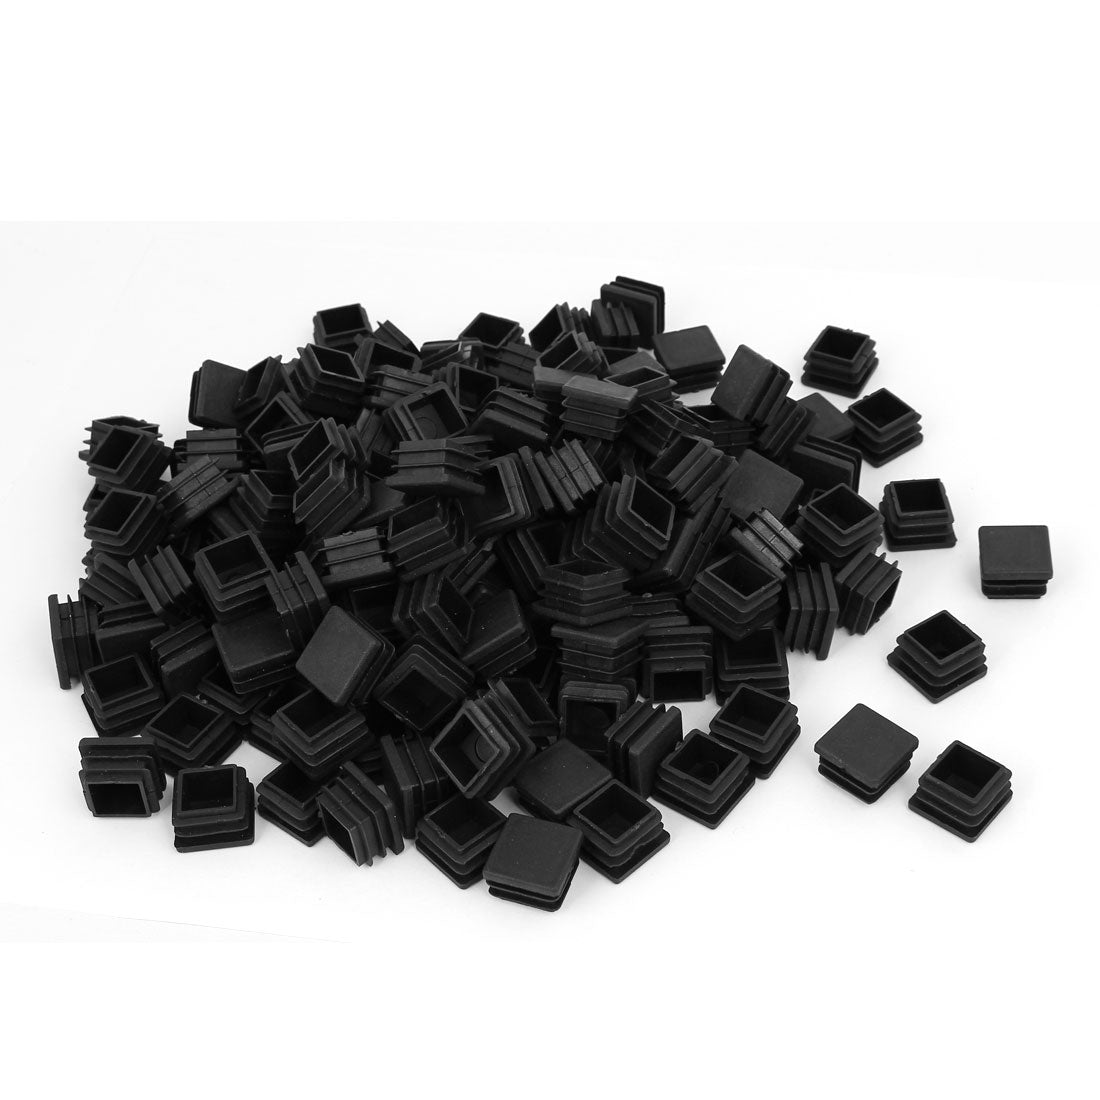 uxcell Uxcell 20mm x 20mm Plastic Square Shaped Blanking End Cap Tube Insert Black 200pcs